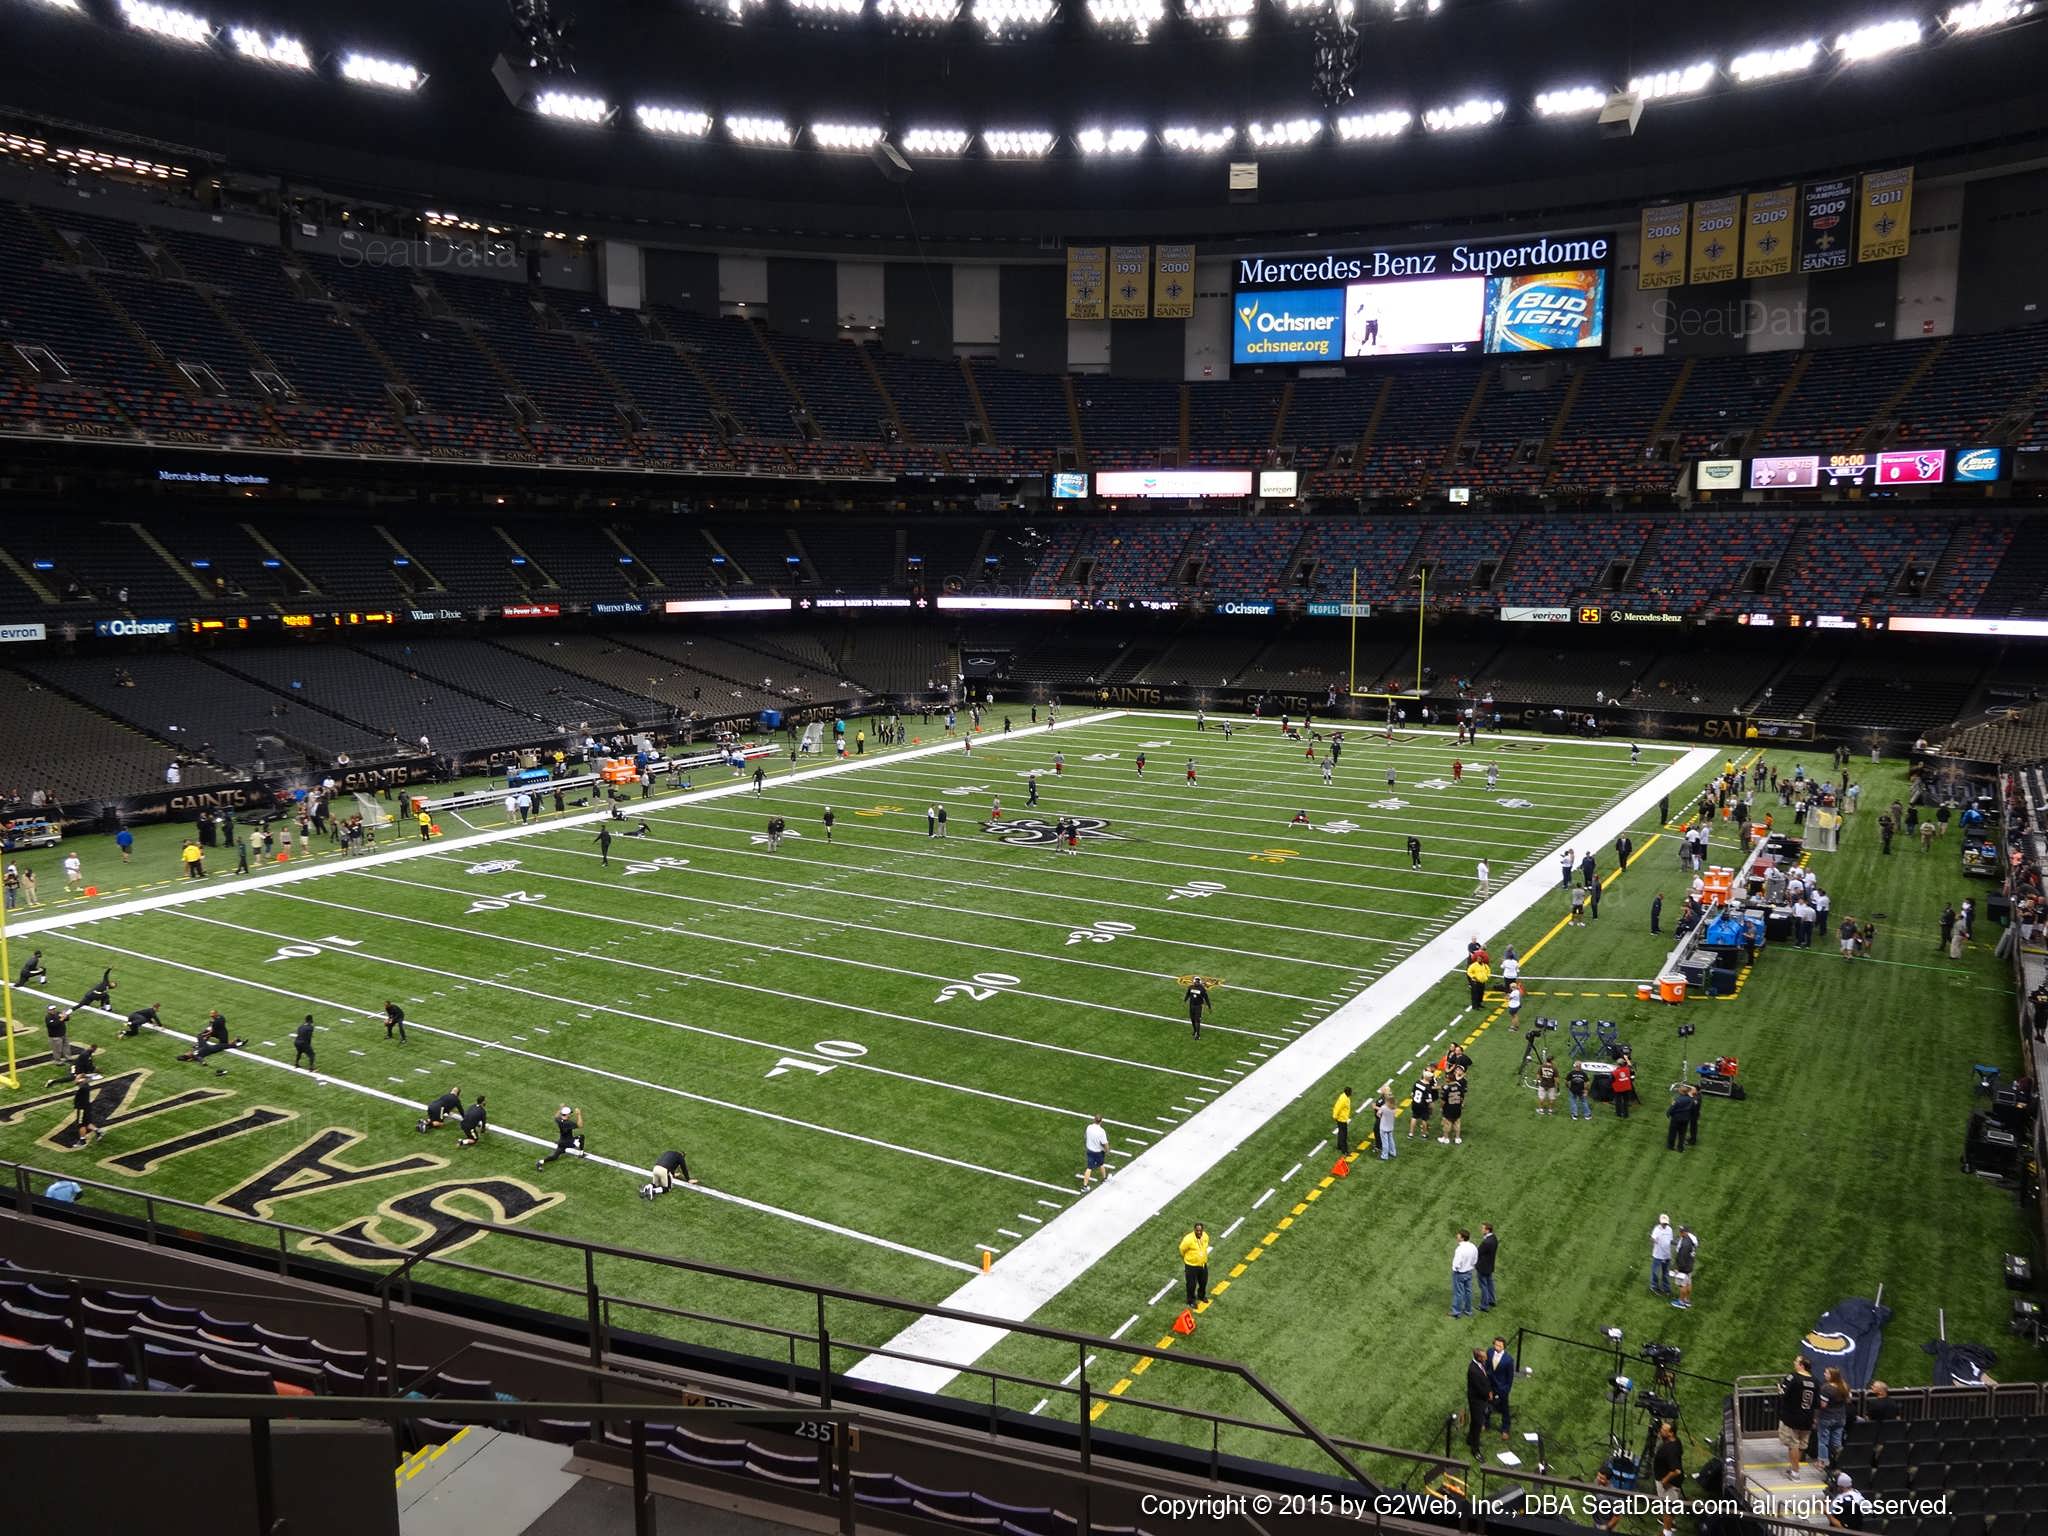 Seat view from section 320 at the Mercedes-Benz Superdome, home of the New Orleans Saints